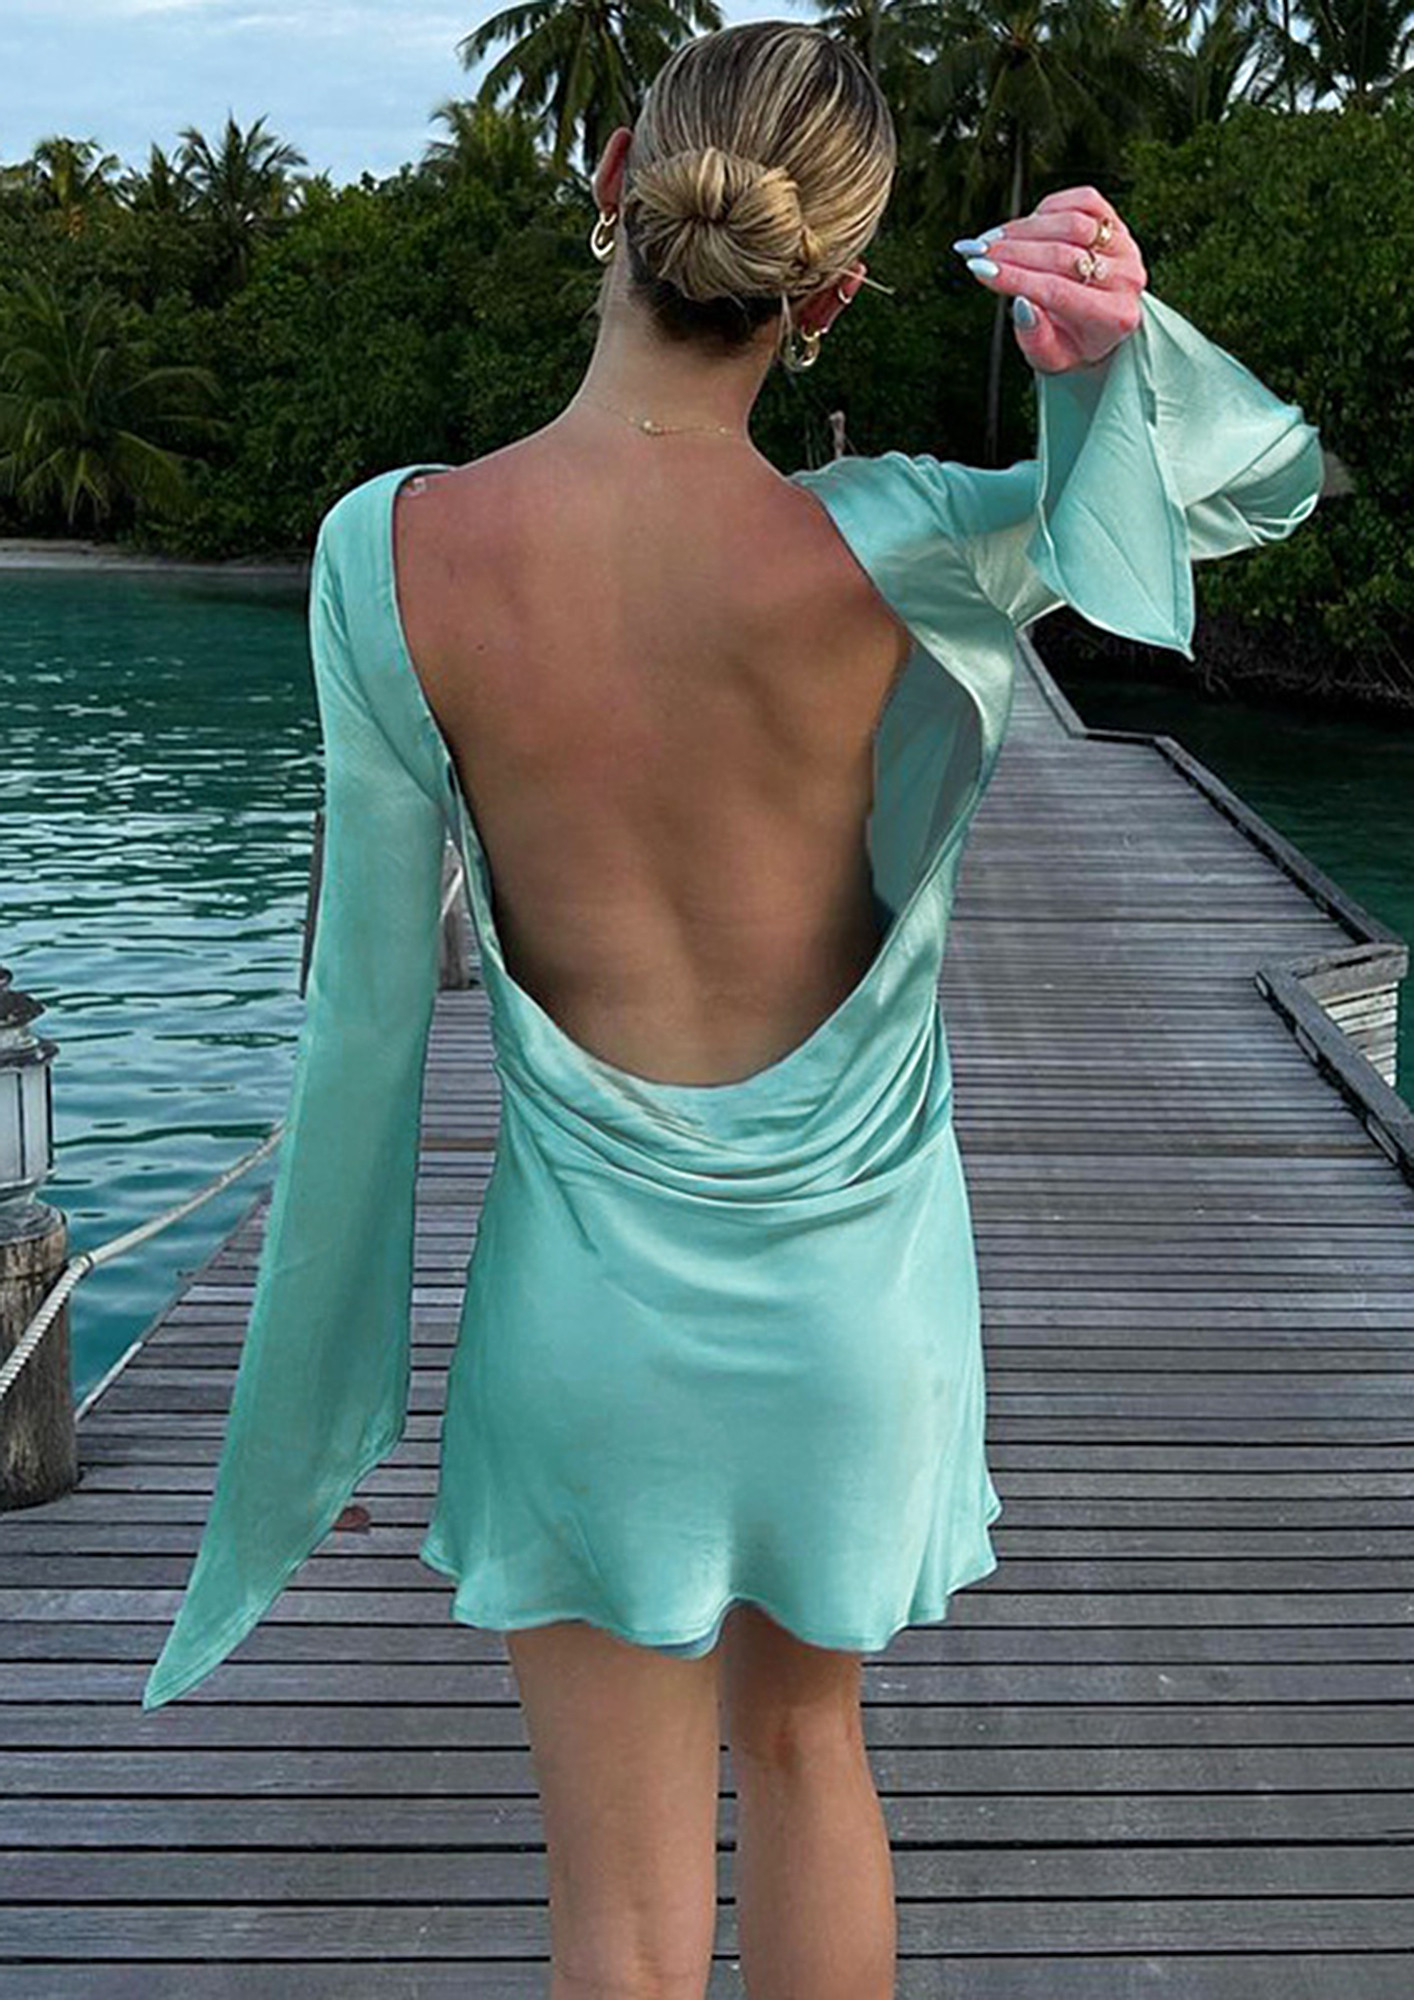 Which is the best back-less picture you have ever seen? I find backless  dresses really sexy. - Quora